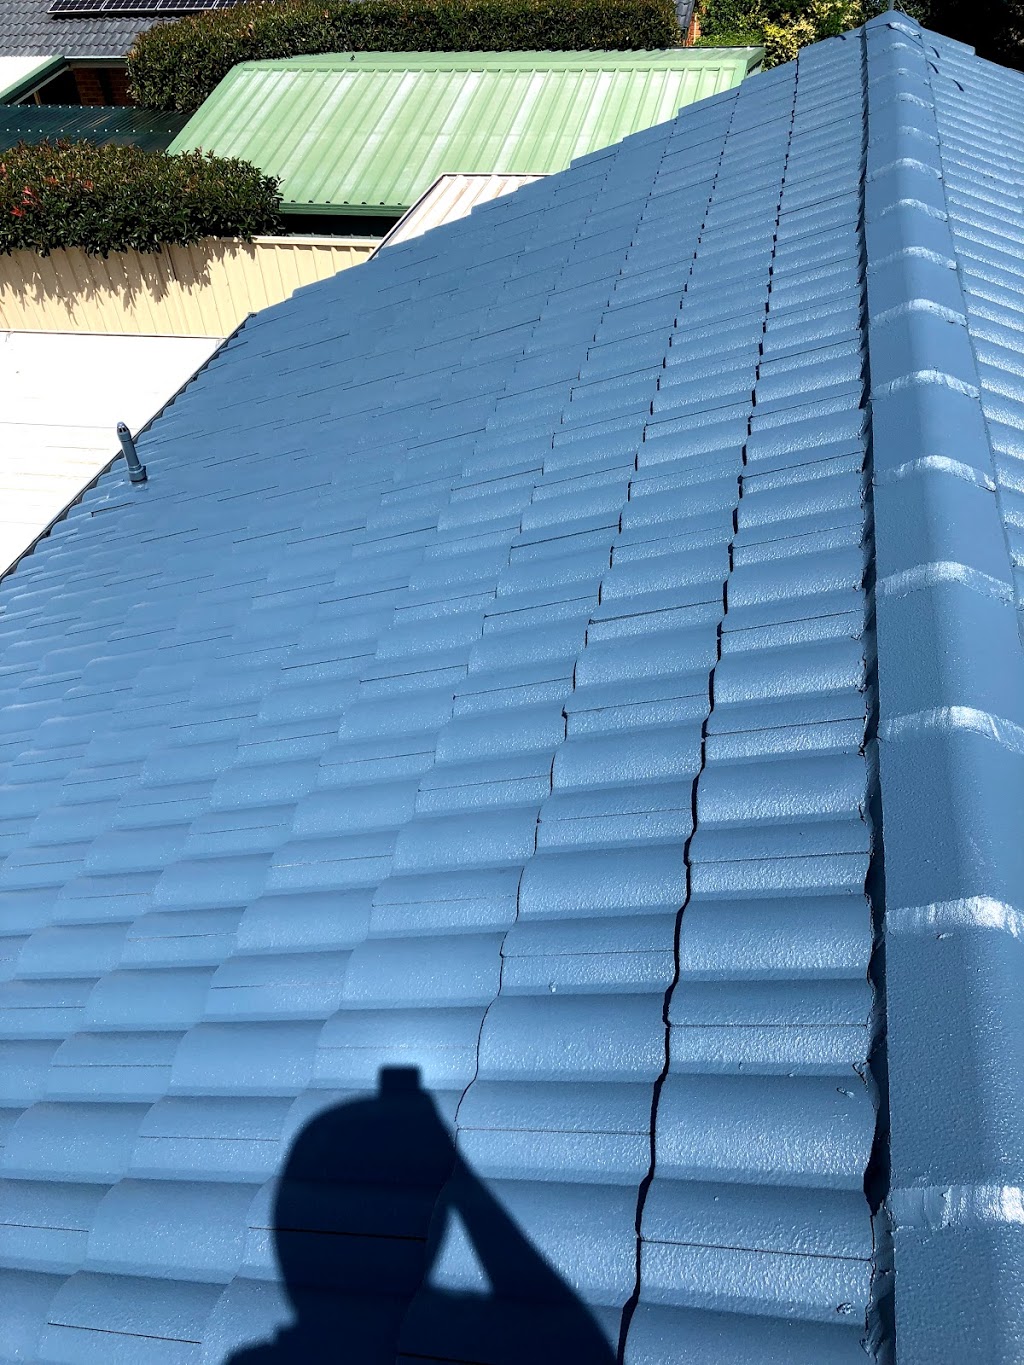 Rooftec Roof Painting and Restoration | roofing contractor | 17 Engel Ave, Karuah NSW 2324, Australia | 0457966551 OR +61 457 966 551